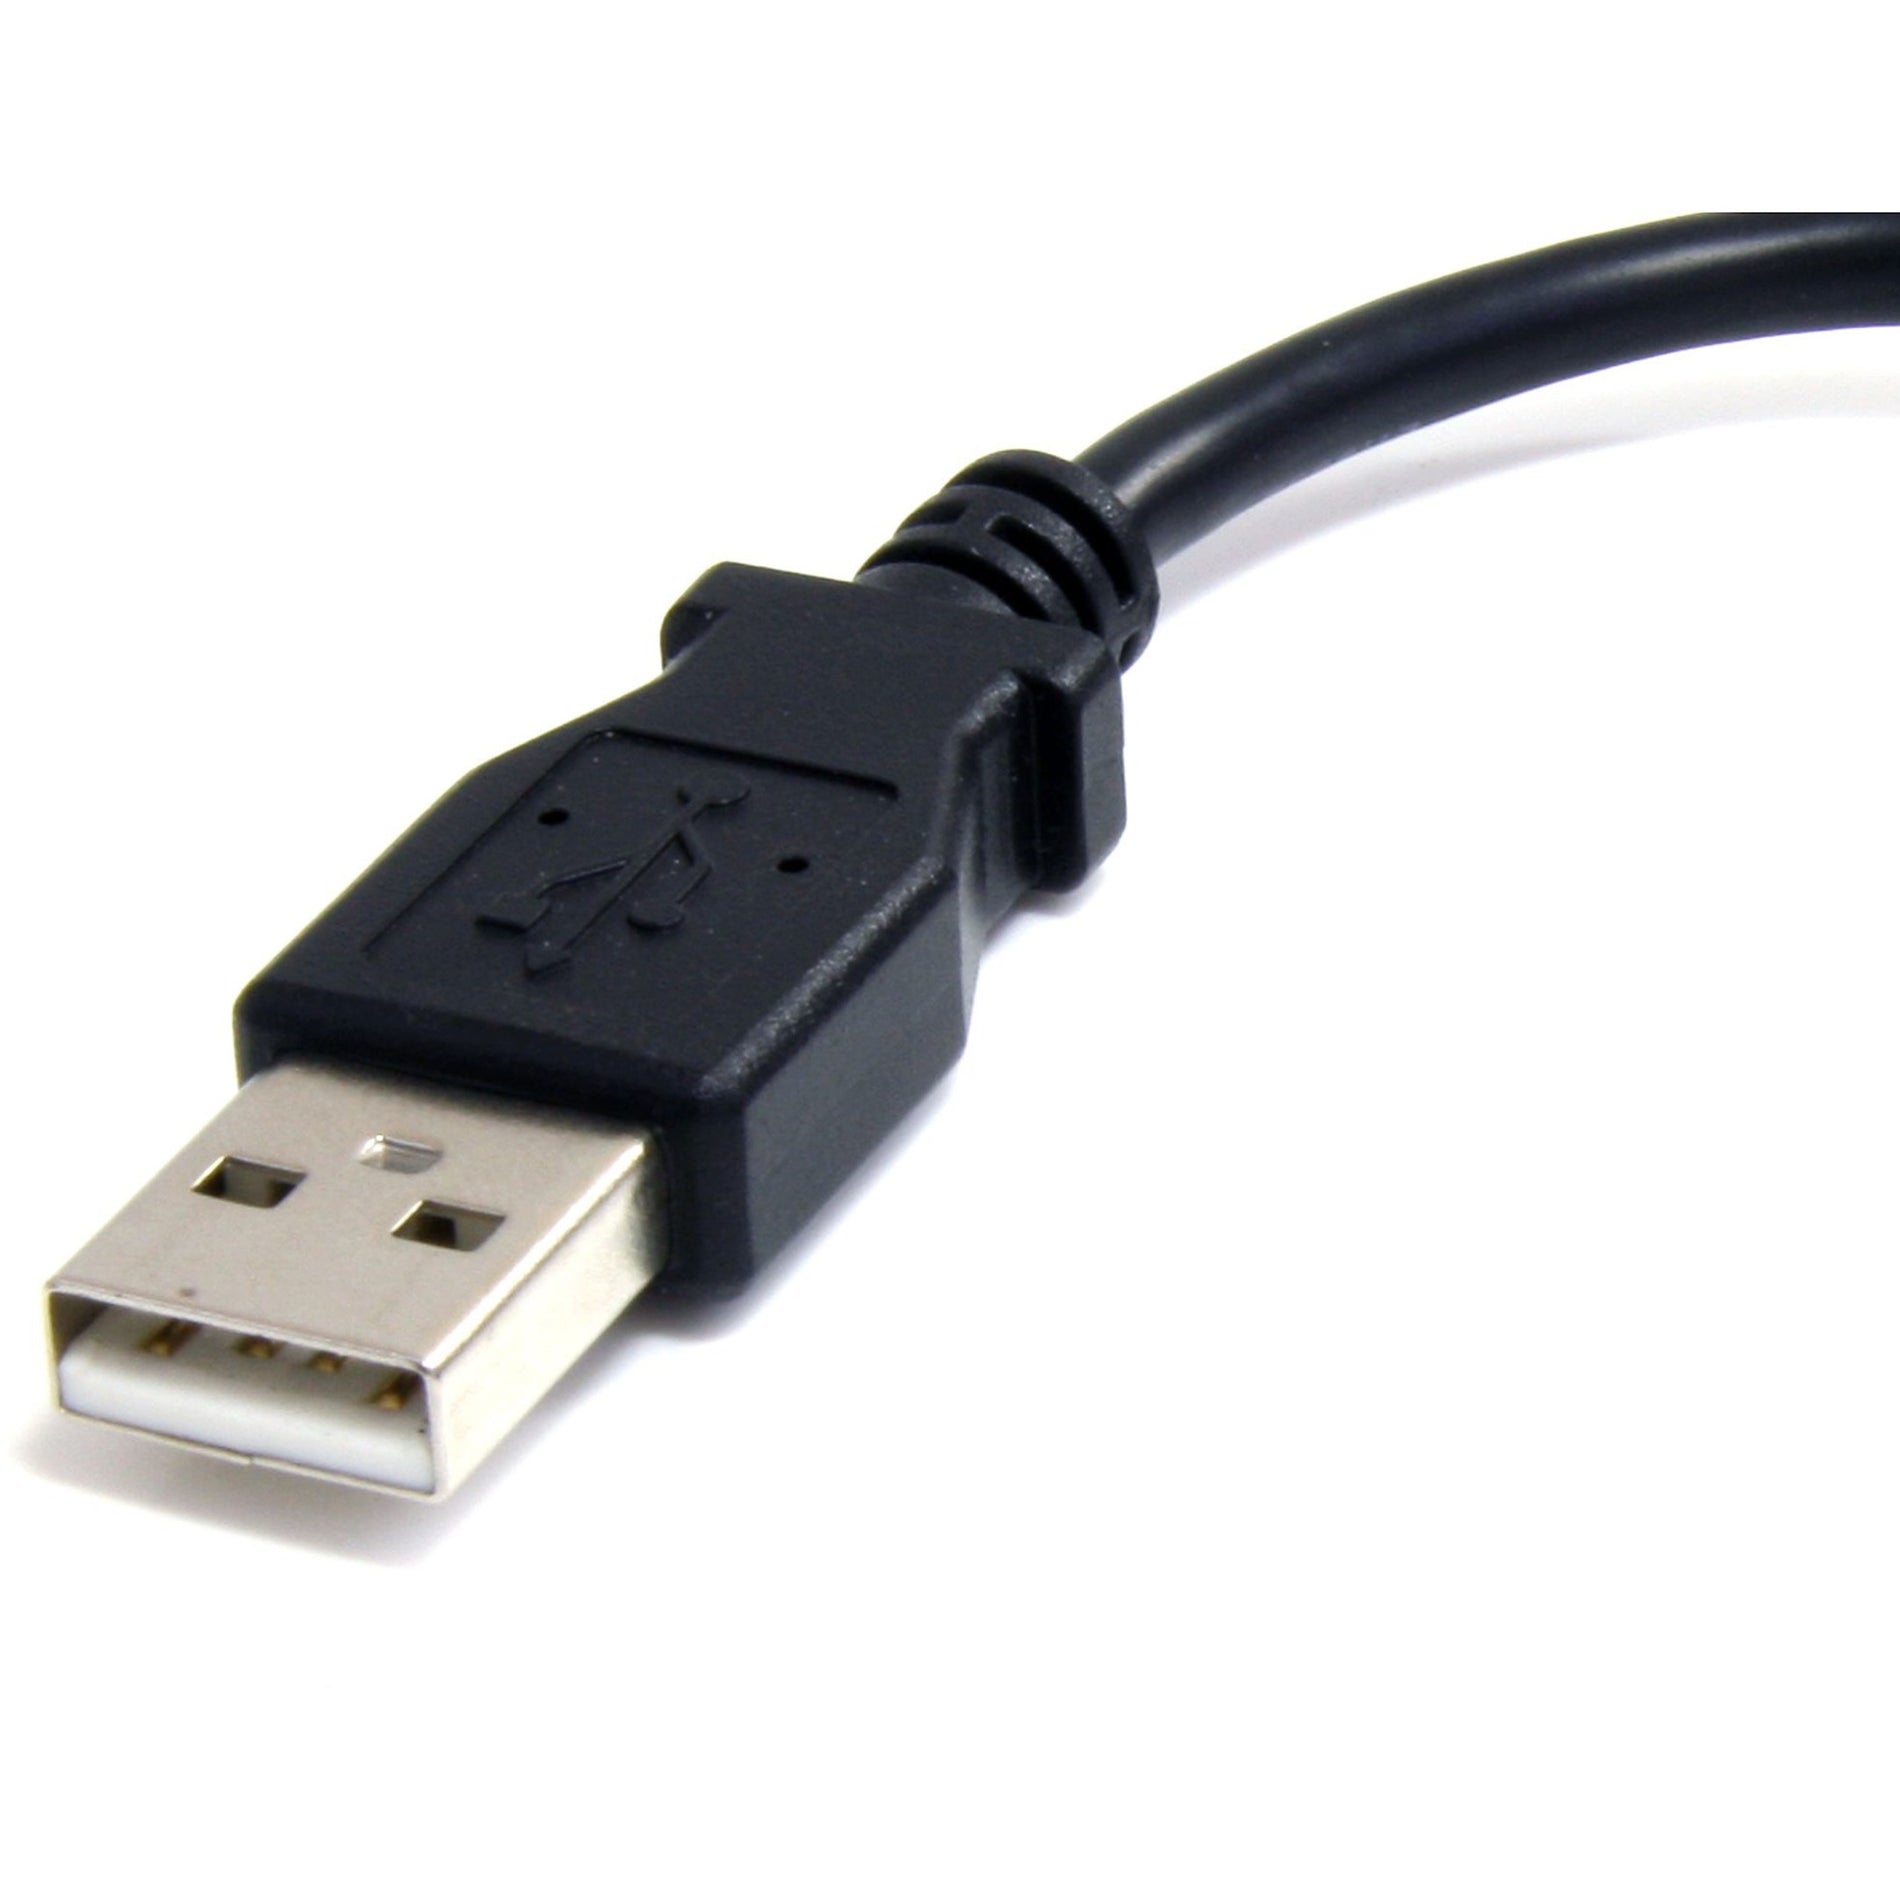 StarTech.com UUSBHAUB6IN 6in Micro USB Cable - A to Micro B, Fast Data Transfer, Lifetime Warranty